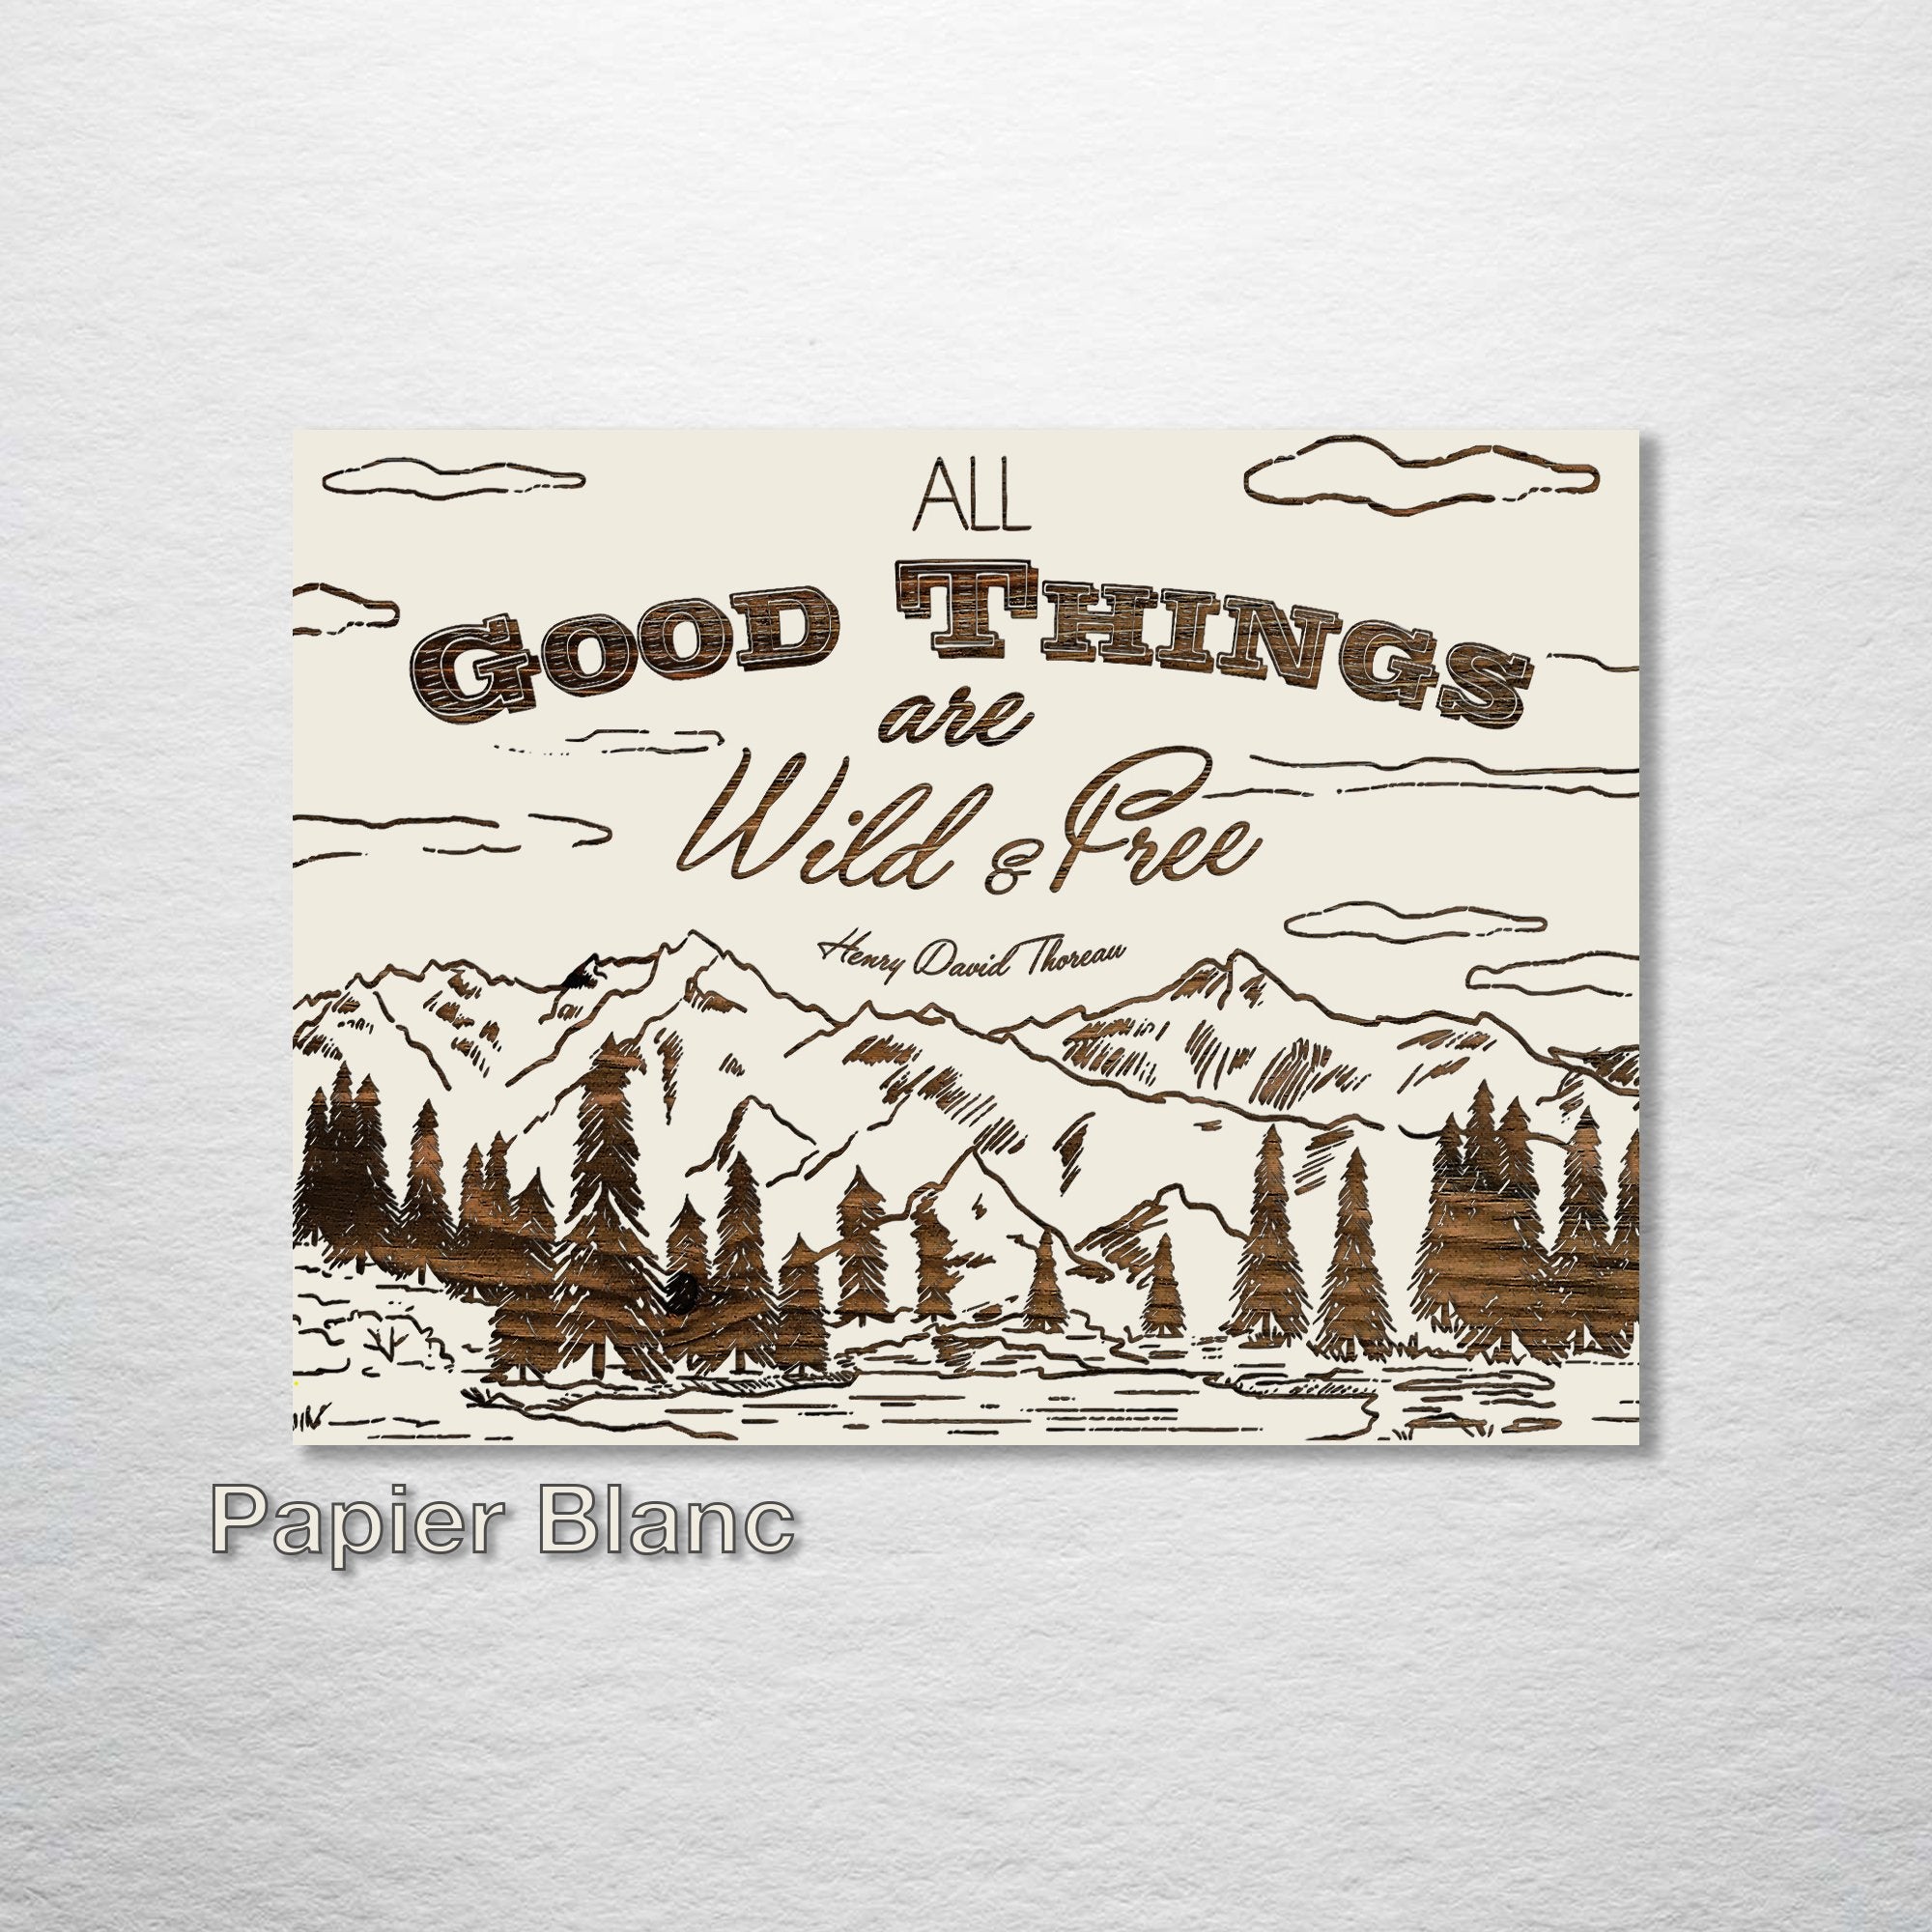 All Good Things Wooden Engraving Cream